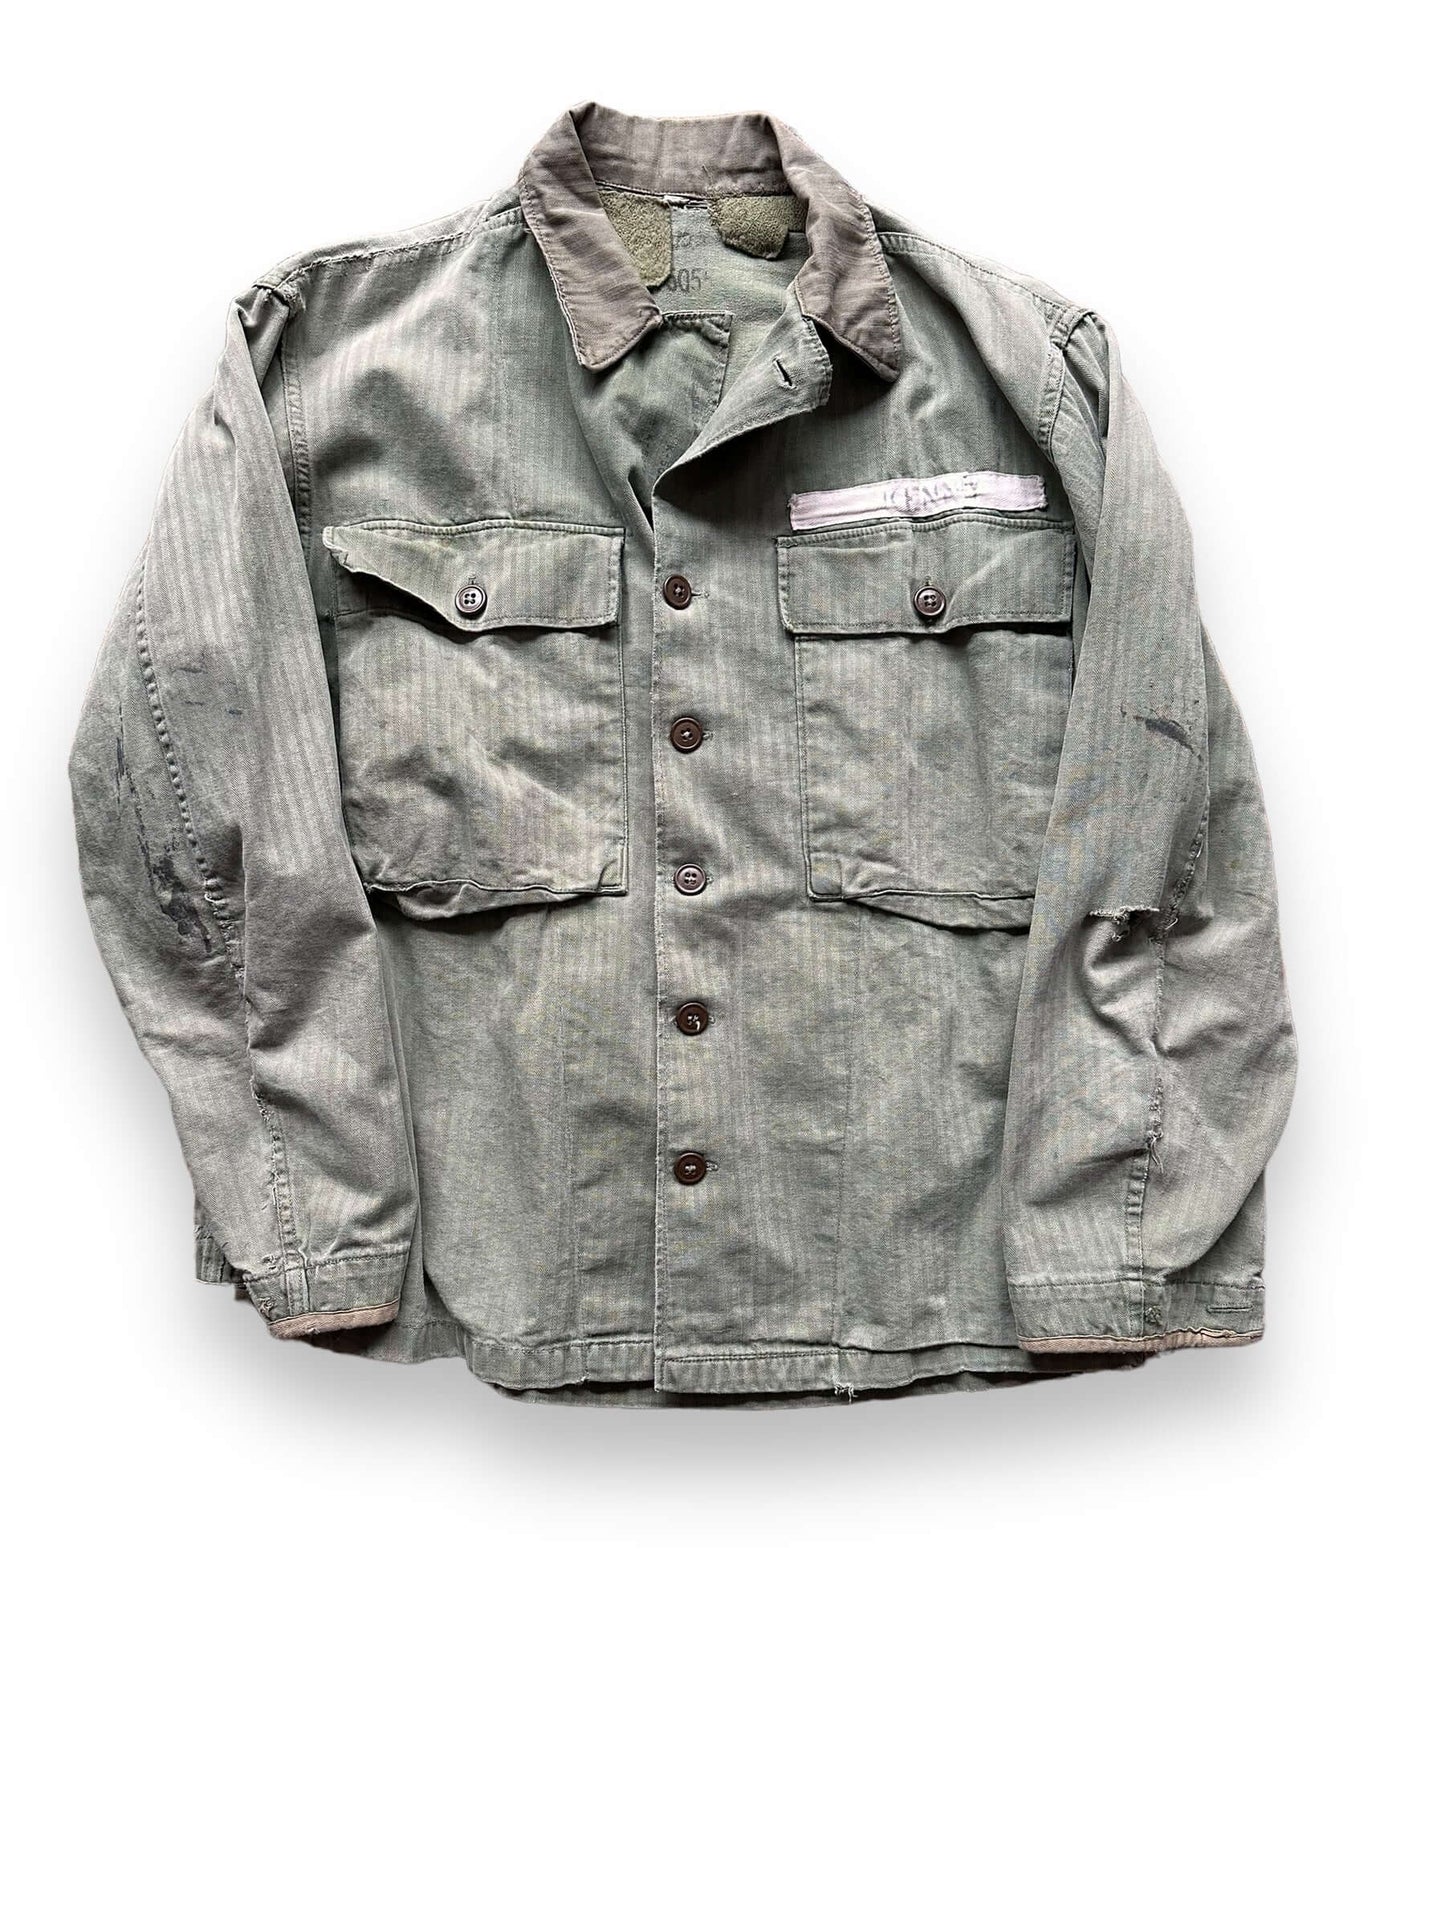 front of Vintage HBT "Kenny" Repaired Jacket SZ L | Vintage Military Jackets Seattle | Barn Owl Vintage Clothing Seattle